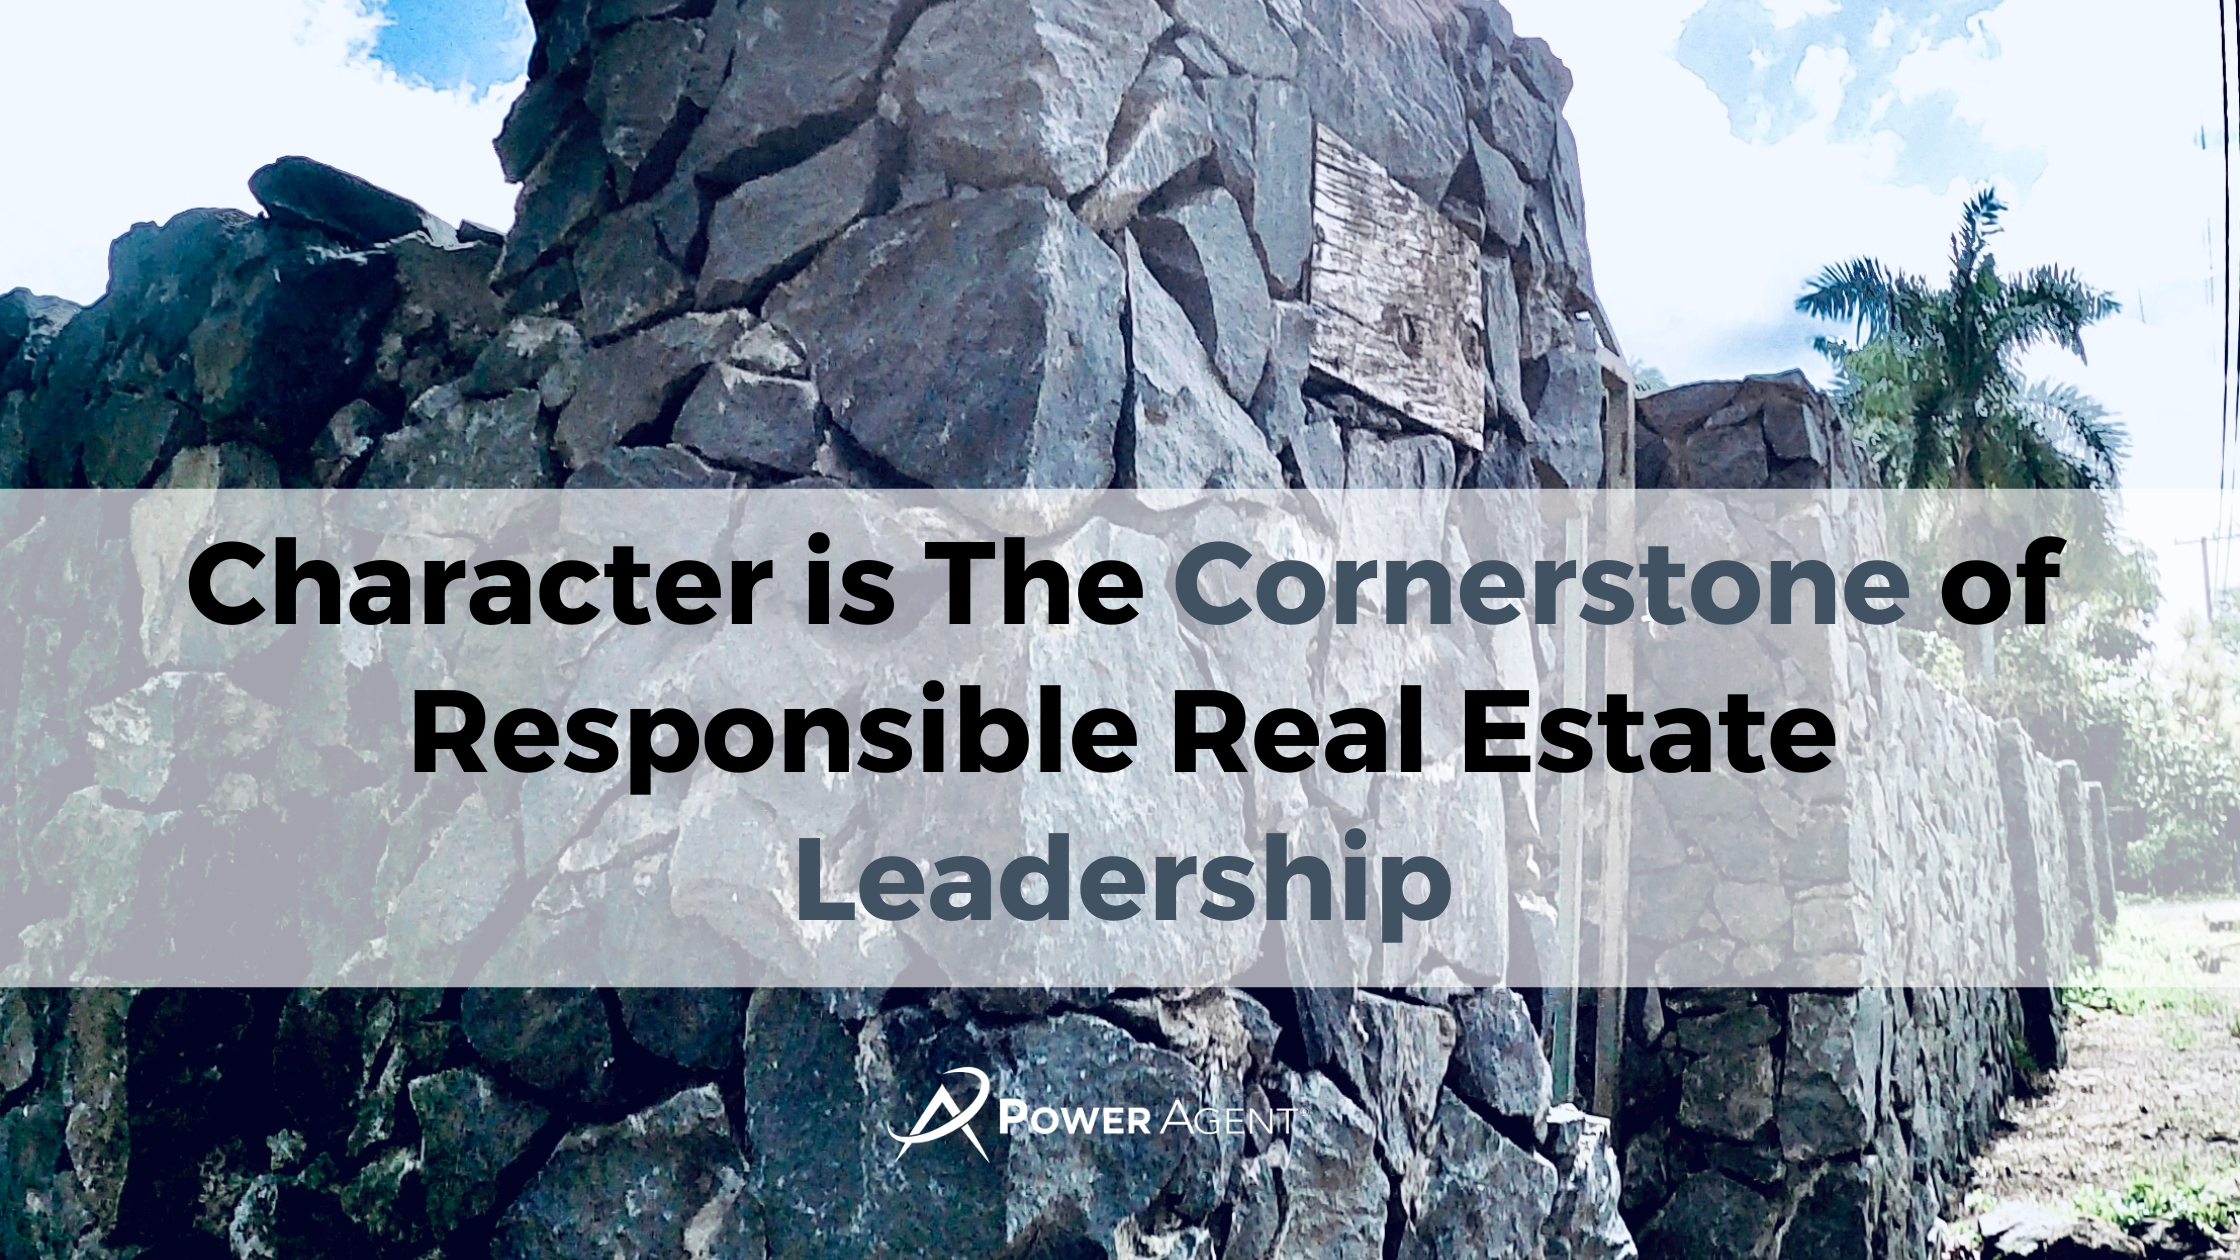 Why Character is The Cornerstone of Responsible Real Estate Leadership